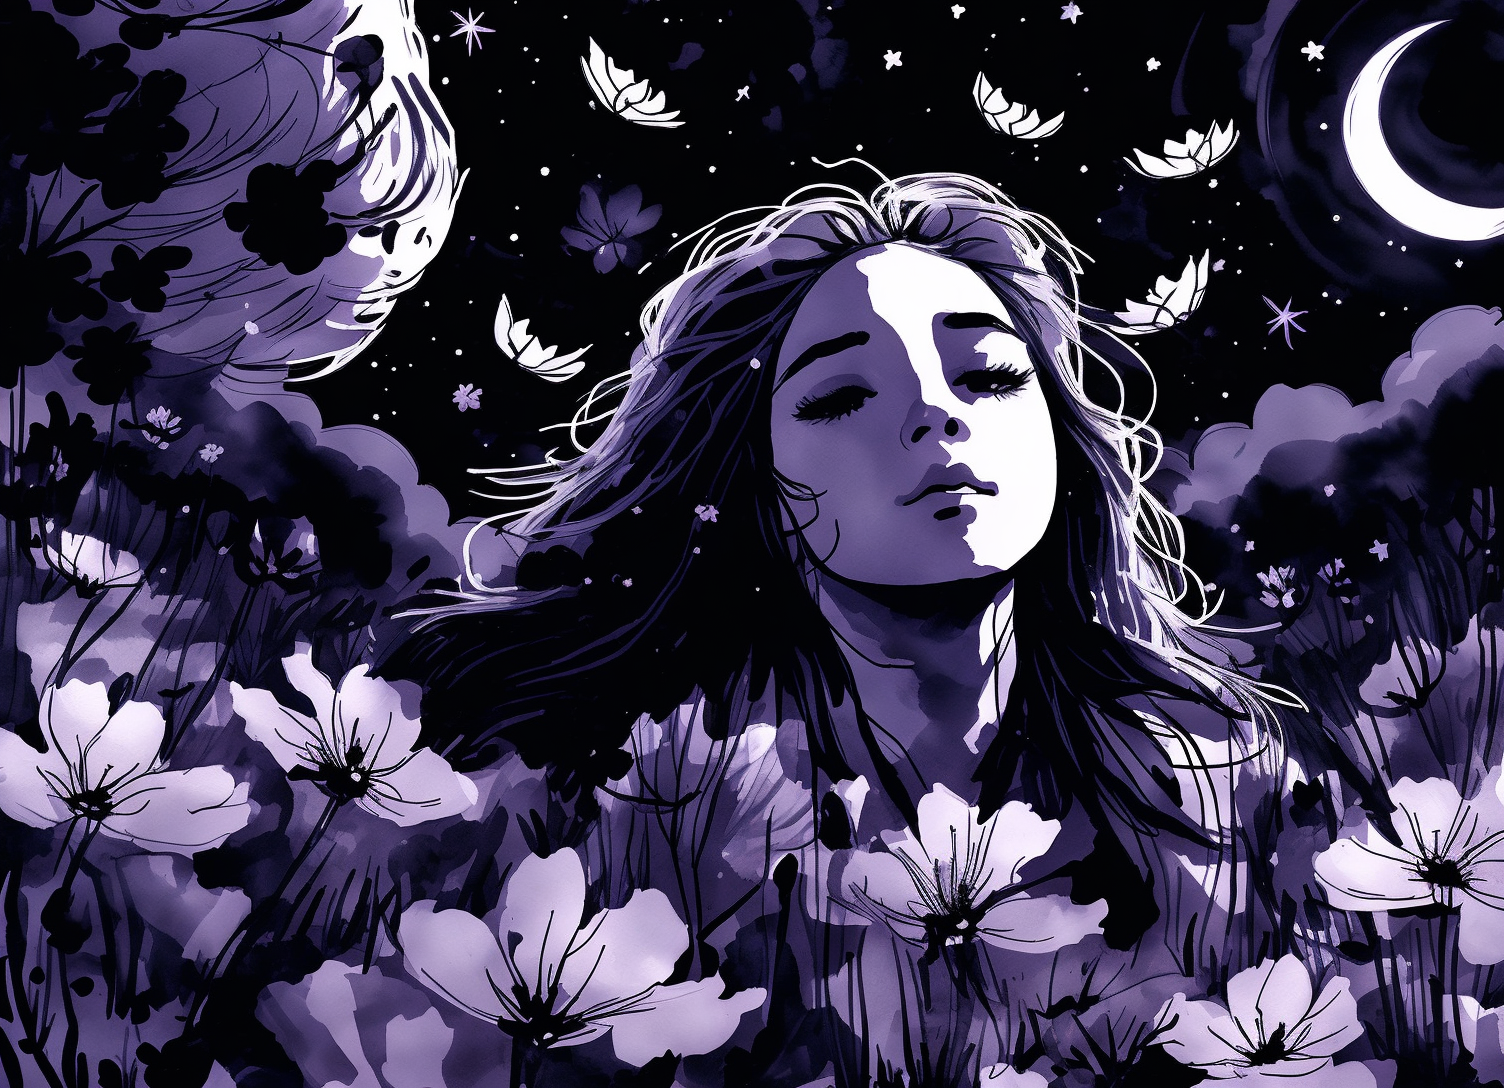 (high contrast ink painting style), a girl lying in a field of flowers looking up at the night sky, epic composition